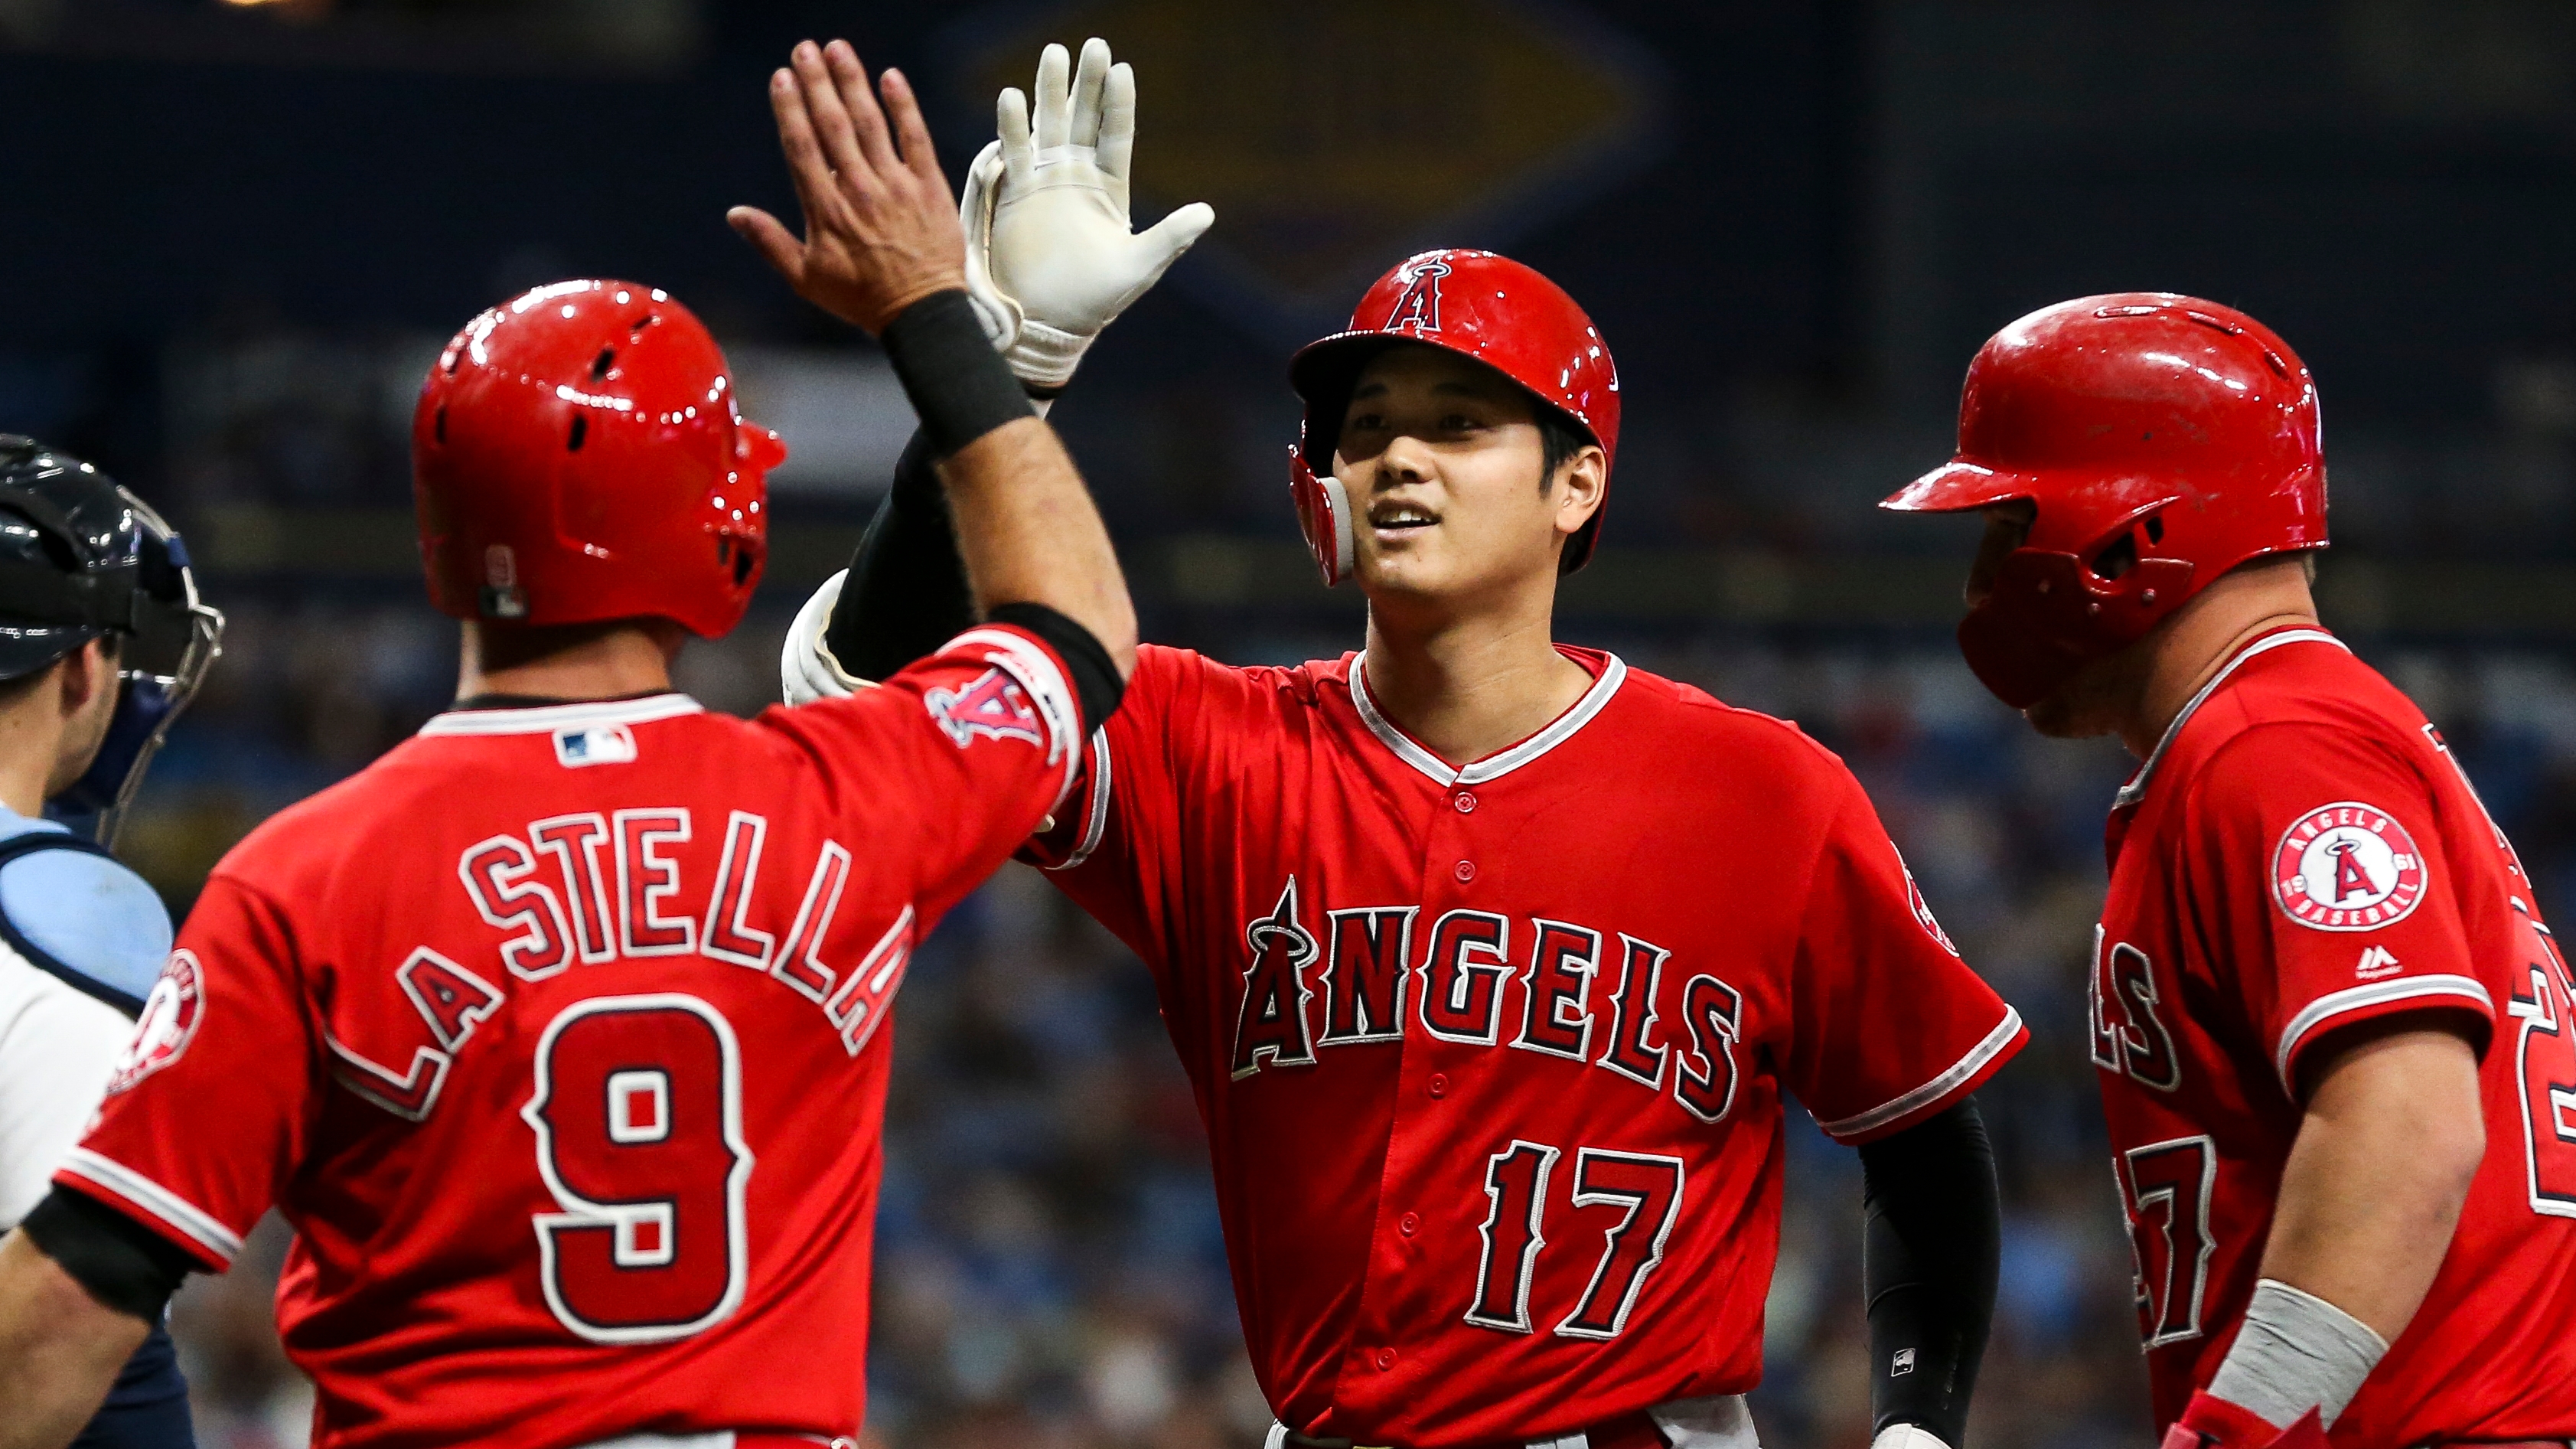 Local Japanese man says he'll be watching when Shohei Ohtani (and